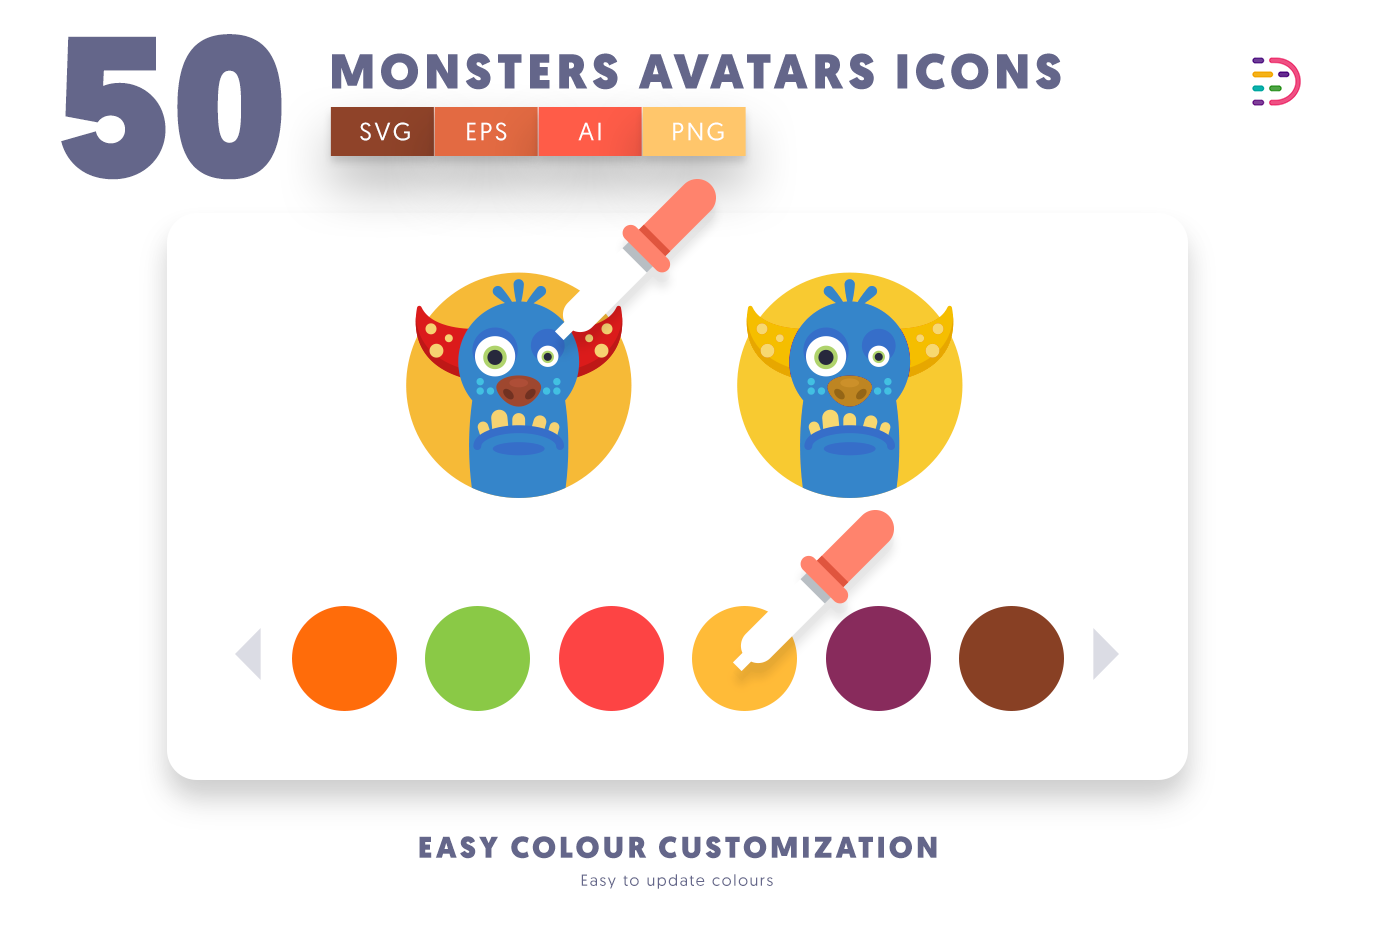 Customizable and vector 50 Monsters Avatars Icons